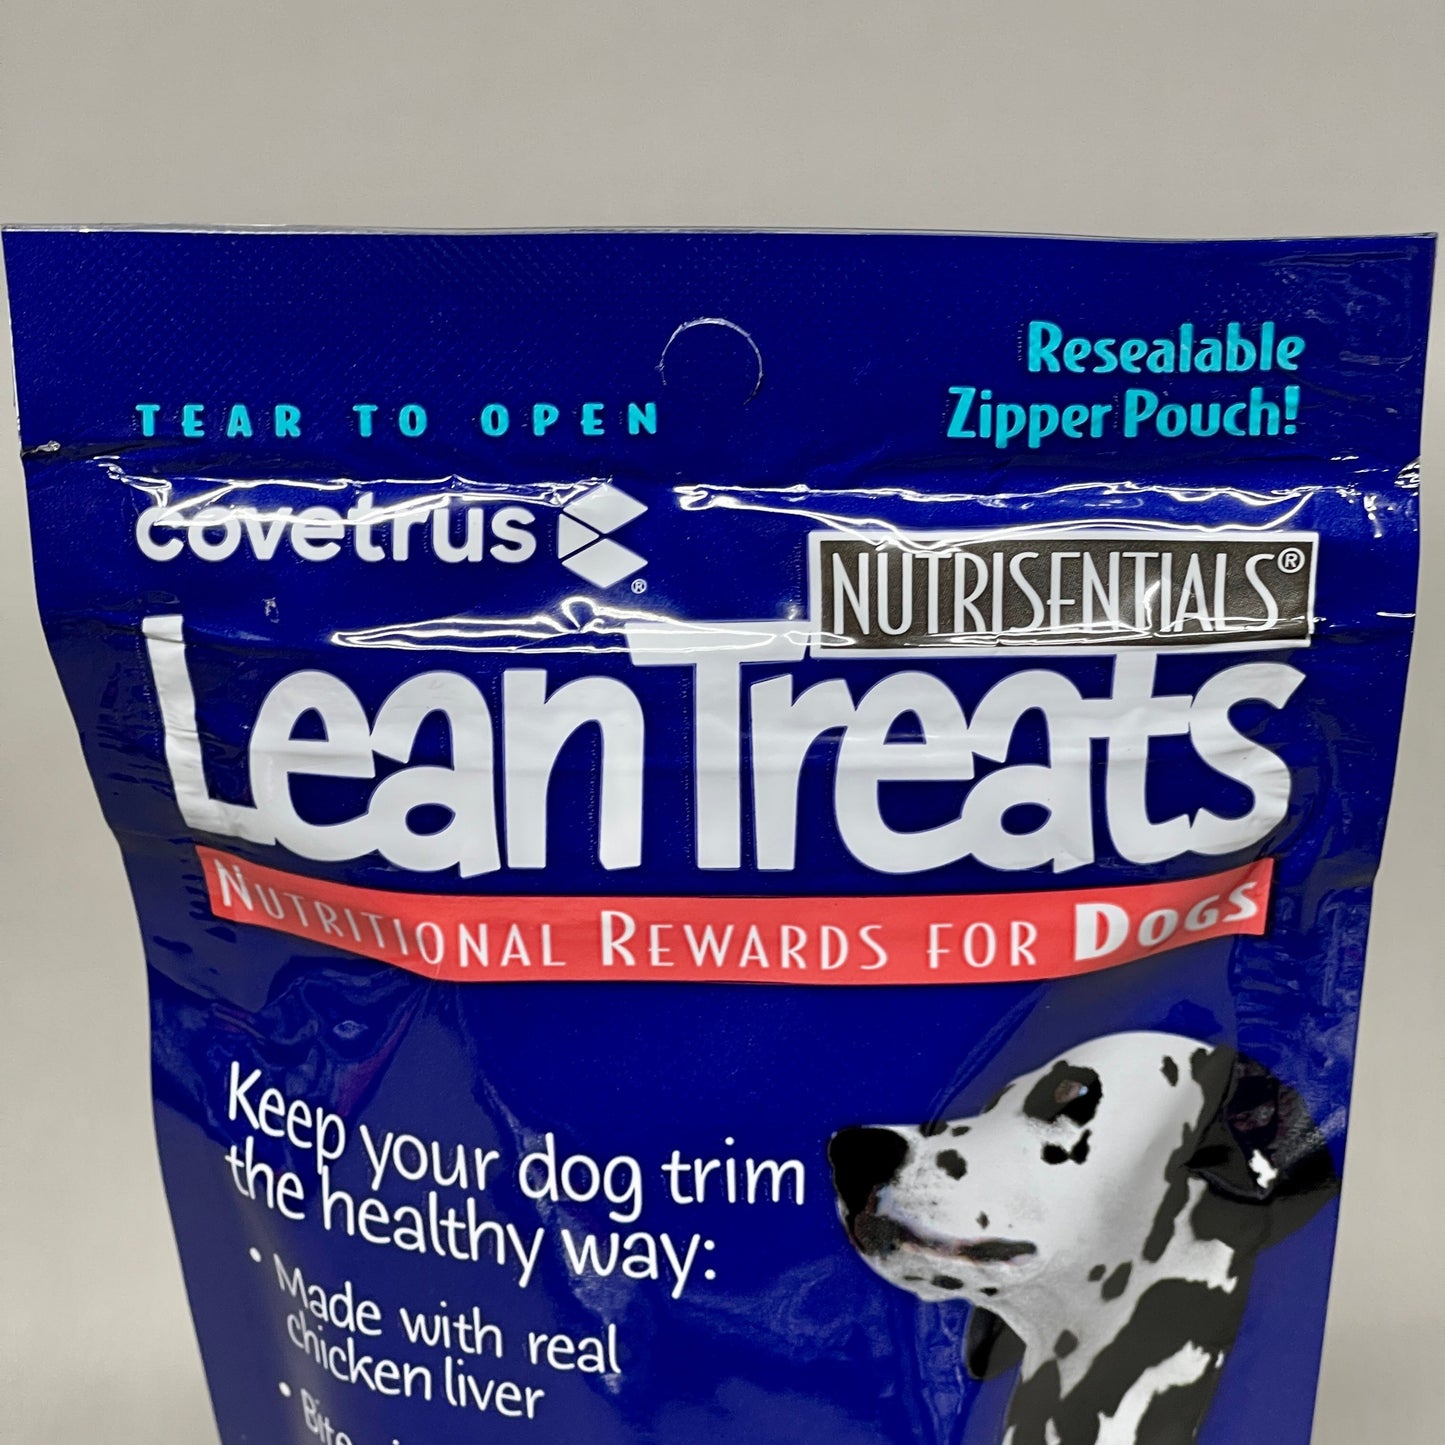 NUTRISENTIALS Lean Treats for Dogs 4 oz Pouch 021164 (6/24)